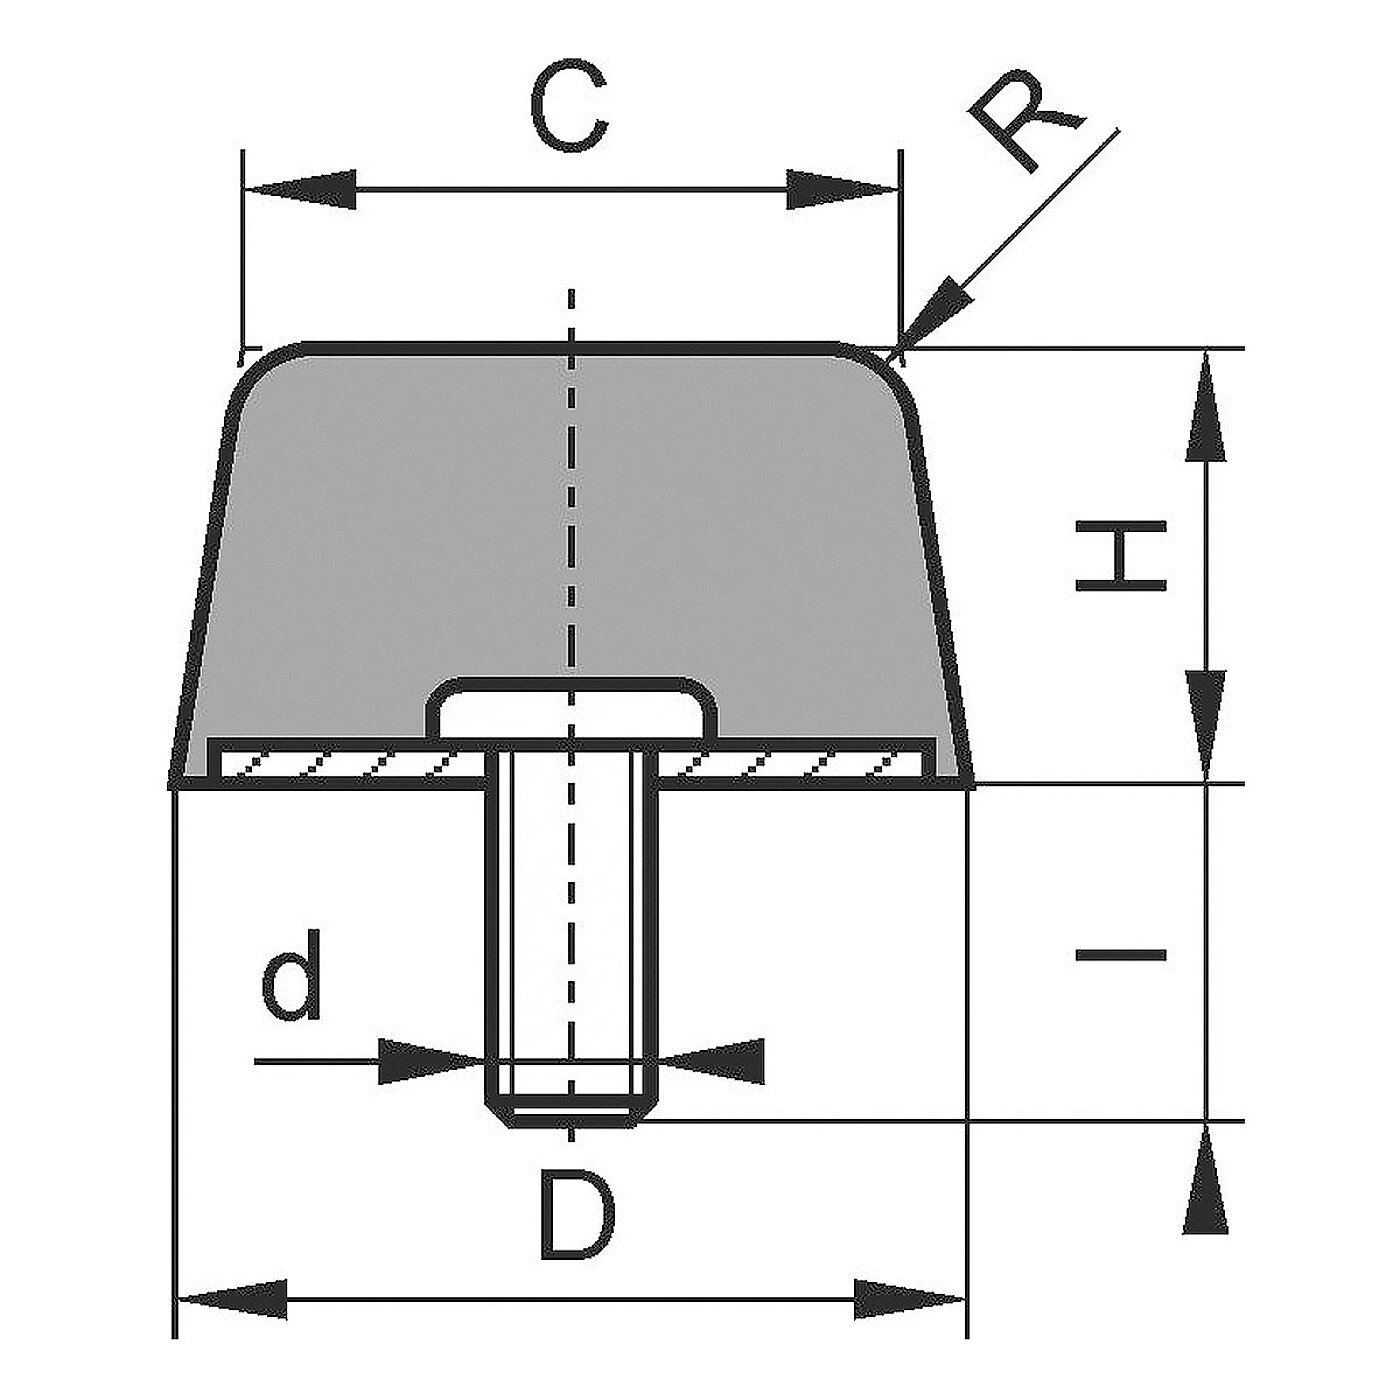 schematic drawing of a rubber-metal bearing with outer thread on one side and a conical elastomer corpus